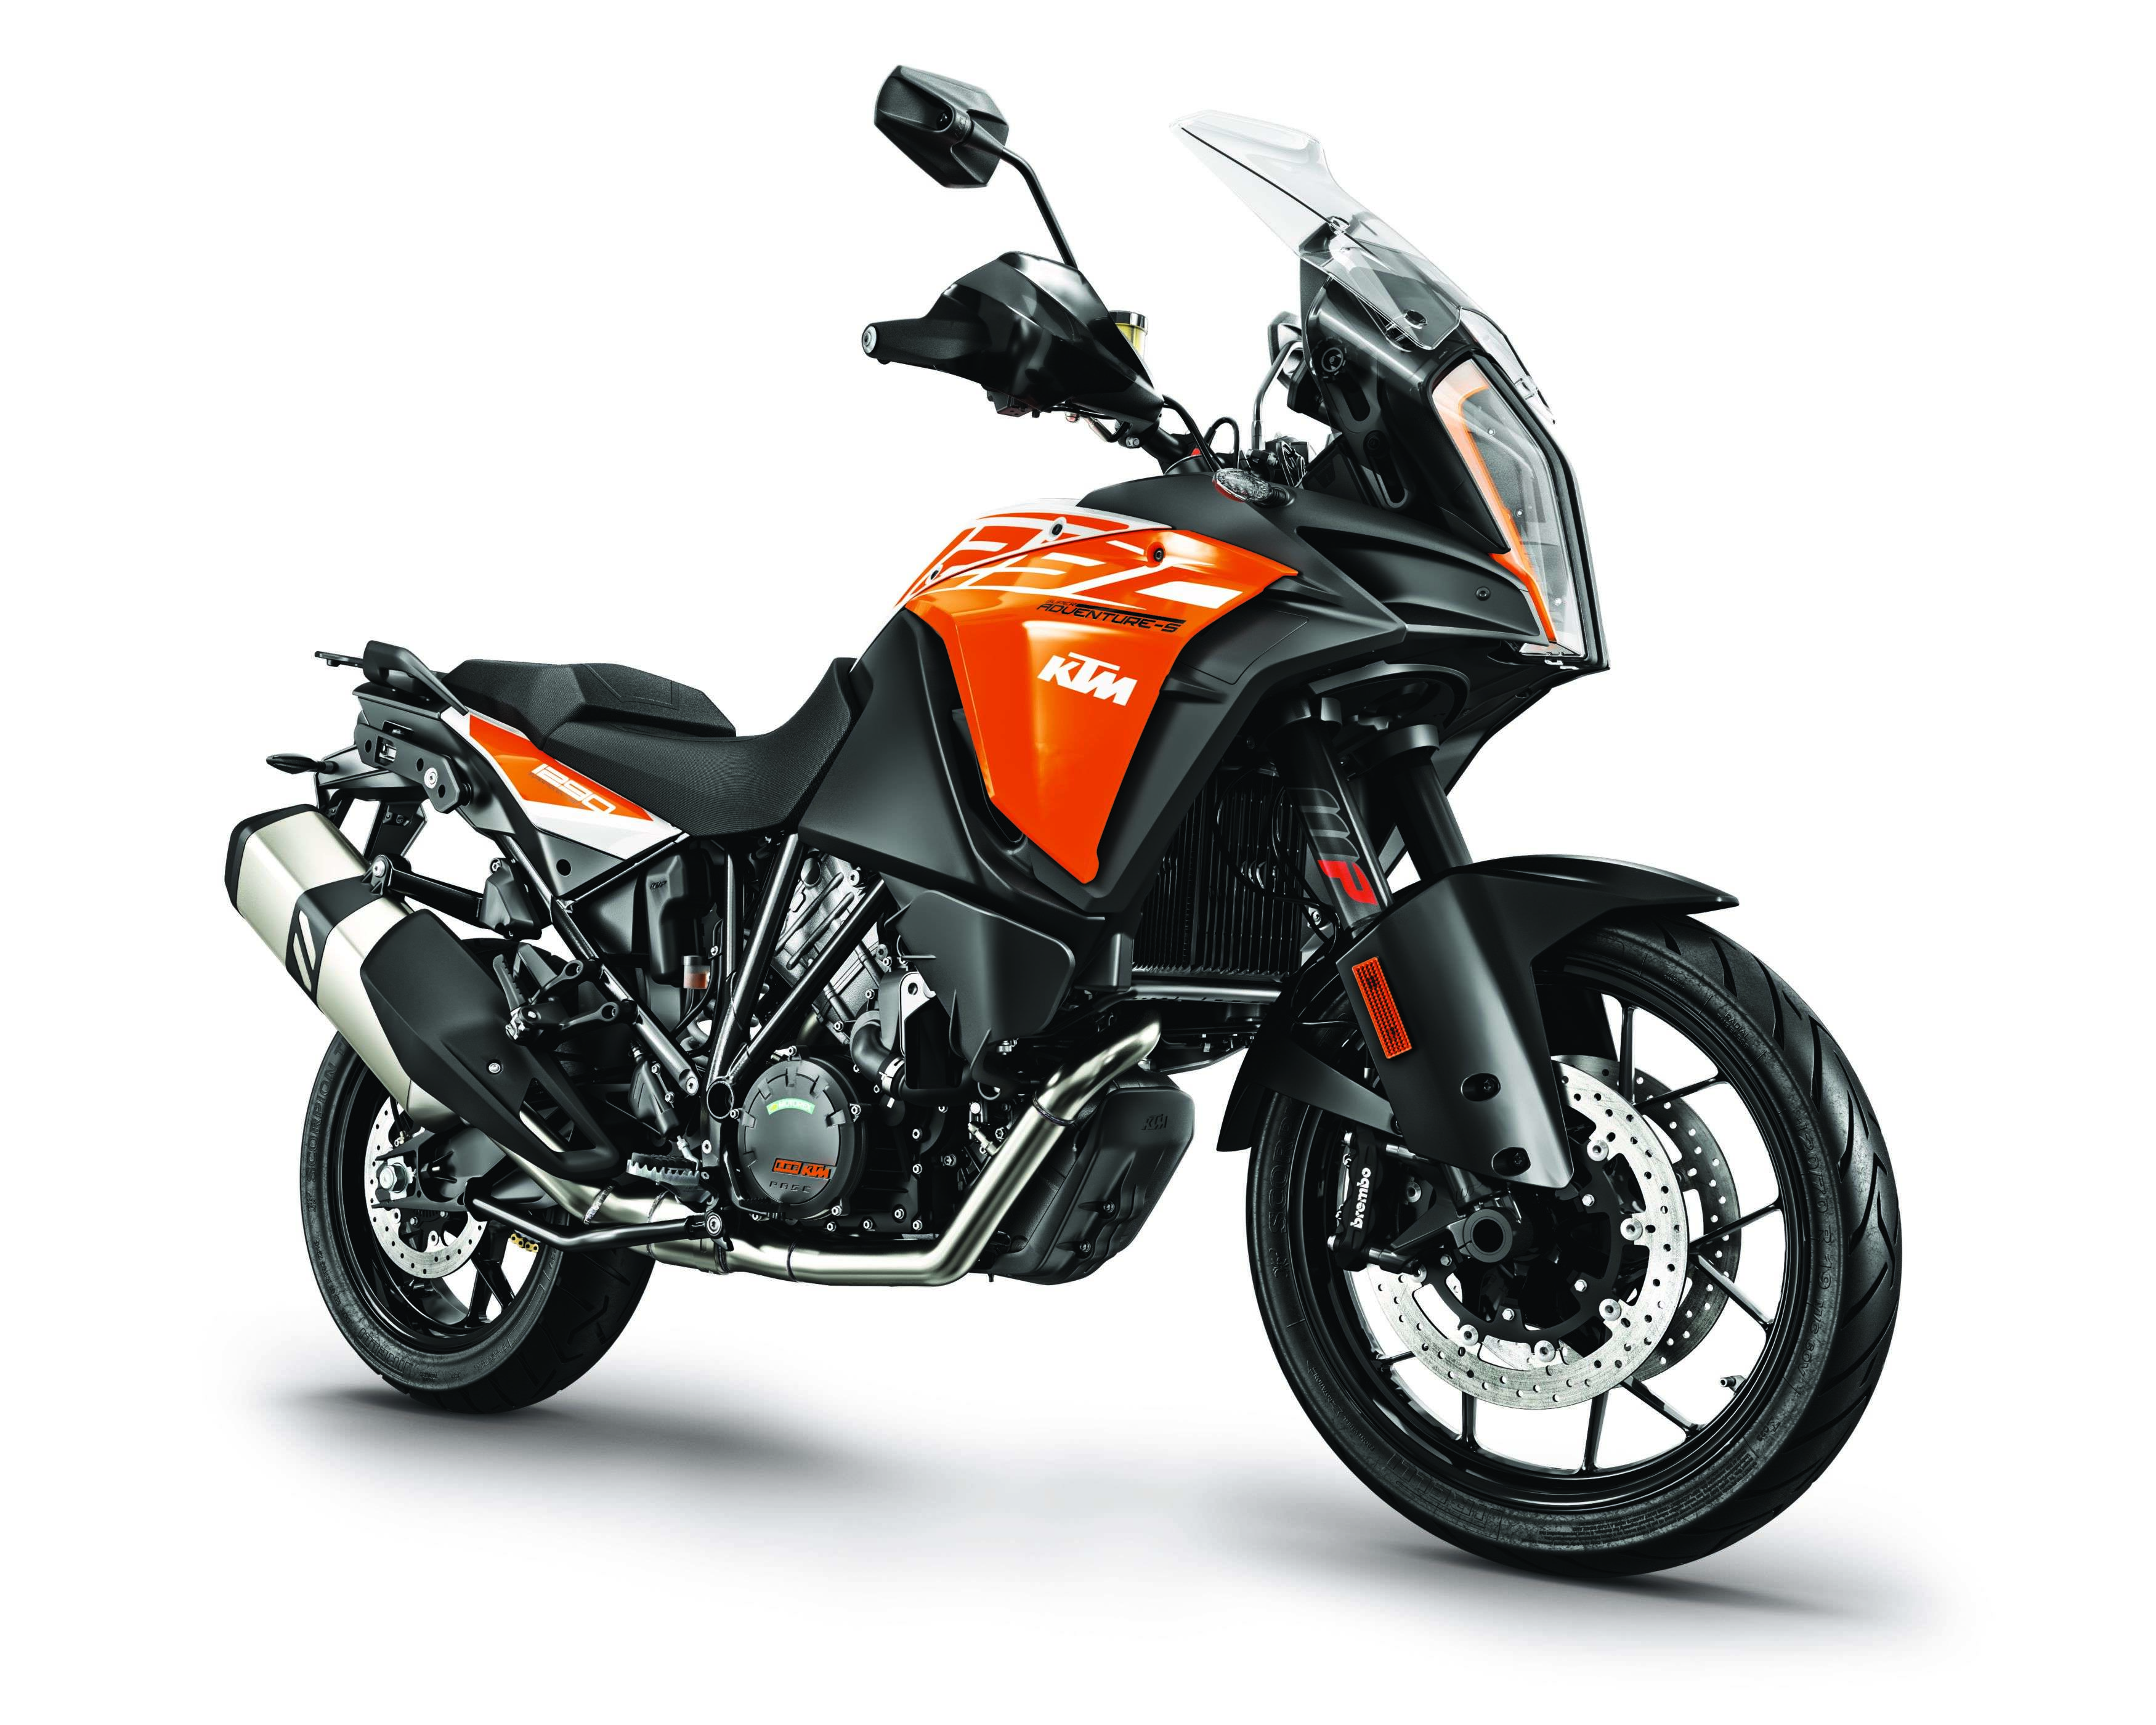 Ktm Ktm Confirms India Launch Of 390 Adventure In 2019 Auto